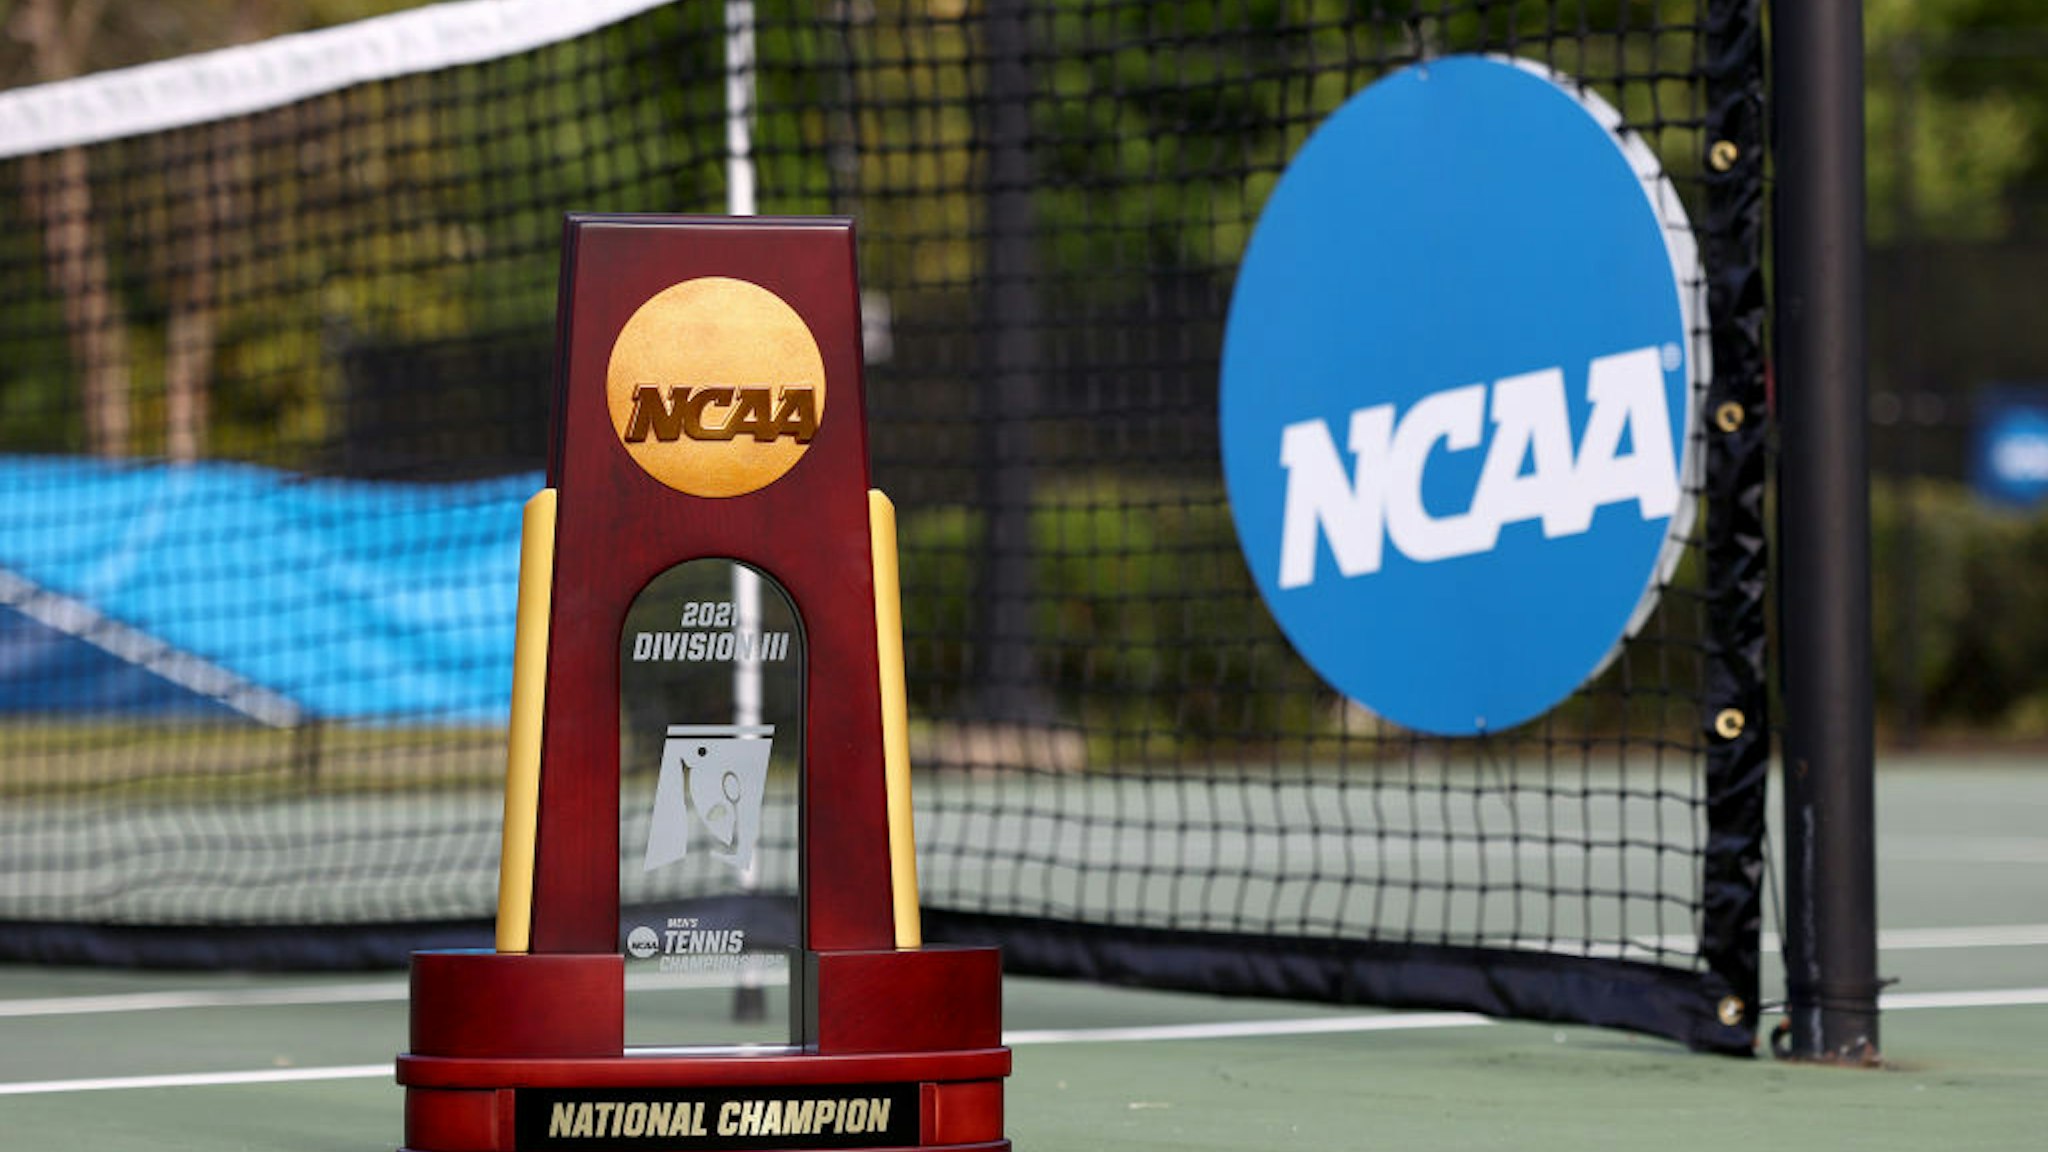 CHATTANOOGA, TN - MAY 26: A detail photo of the trophy won by the Emory Eagles after their win against the Case Western Reserve Spartans during the Division III Men's Tennis Championship held at the Champions Tennis Club on May 26, 2021 in Chattanooga, Tennessee. (Photo by Grant Halverson/NCAA Photos via Getty Images)